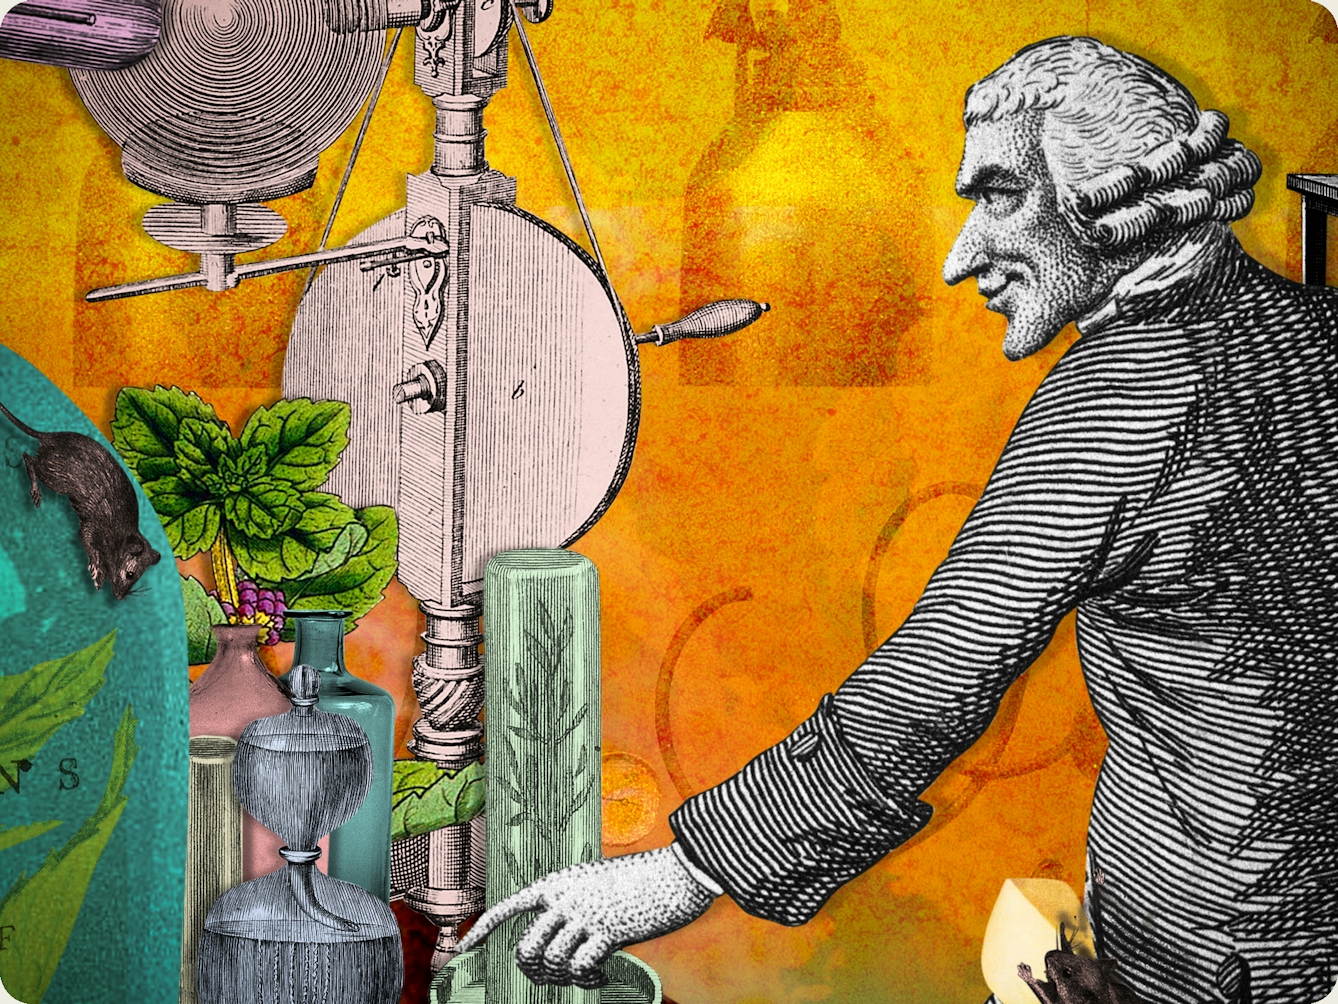 Detail from a larger digital montage artwork created using archive material. The image shows an 18th-century male character in wig and coat looking to the left, arm outstretched pointed to objects on a table. These object seem to be part of a larger science experiment with all sorts of things going on. Surrounding the objects are scientific instruments including test tubes, condensing tubes, and mechanical tools. More mice run over these elements surrounded by mint leaves. The background is a warm orange and yellow with motifs of bubbles and swirls.